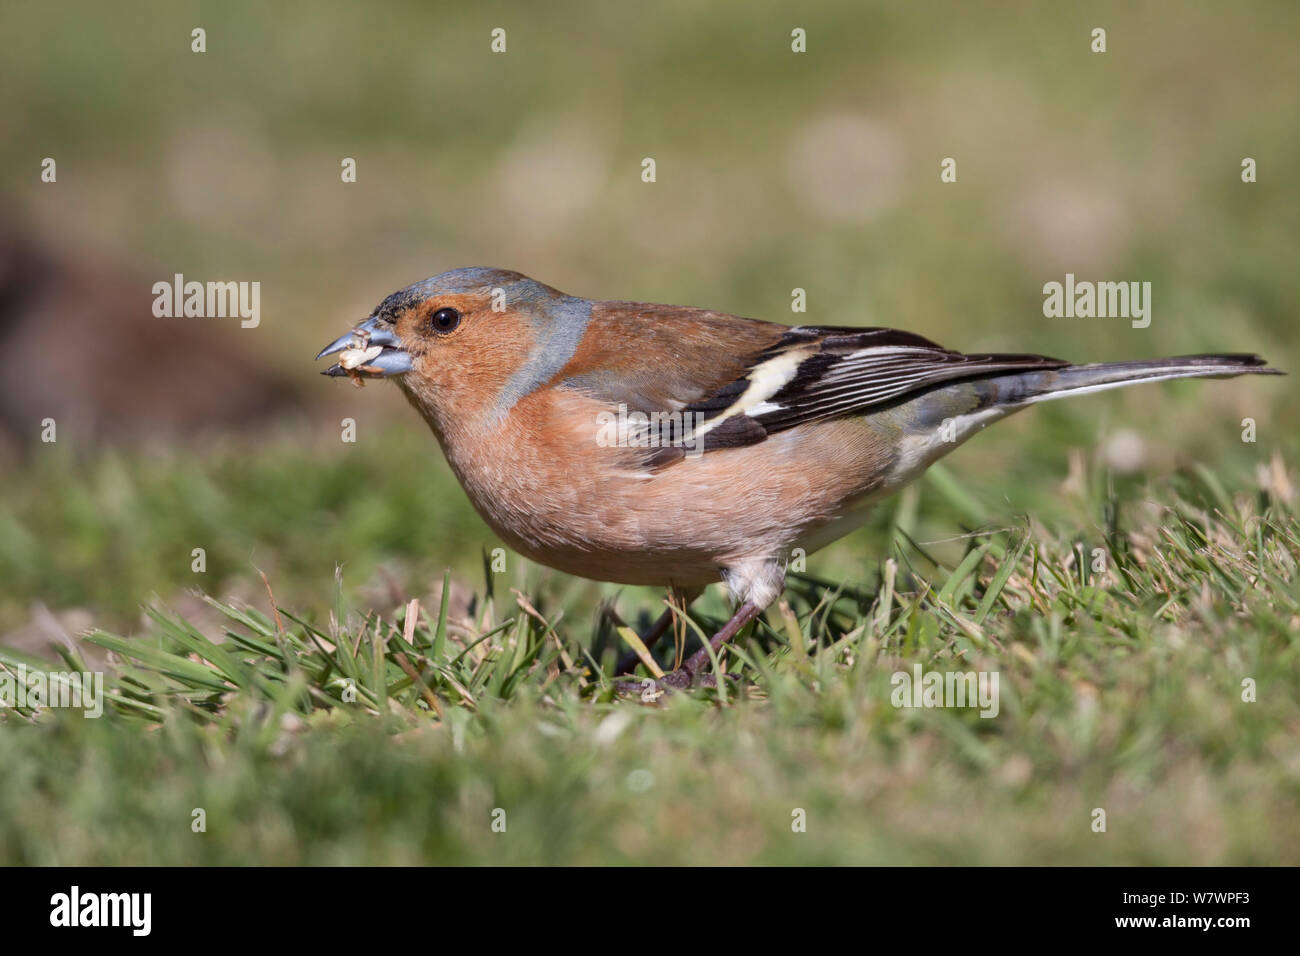 Adult male Common chaffinch (Fringilla coelebs) in fresh breeding plumage, feeding on seeds amongst short grass. Havelock North, Hawkes Bay, New Zealand, September. Introduced species in New Zealand. Stock Photo